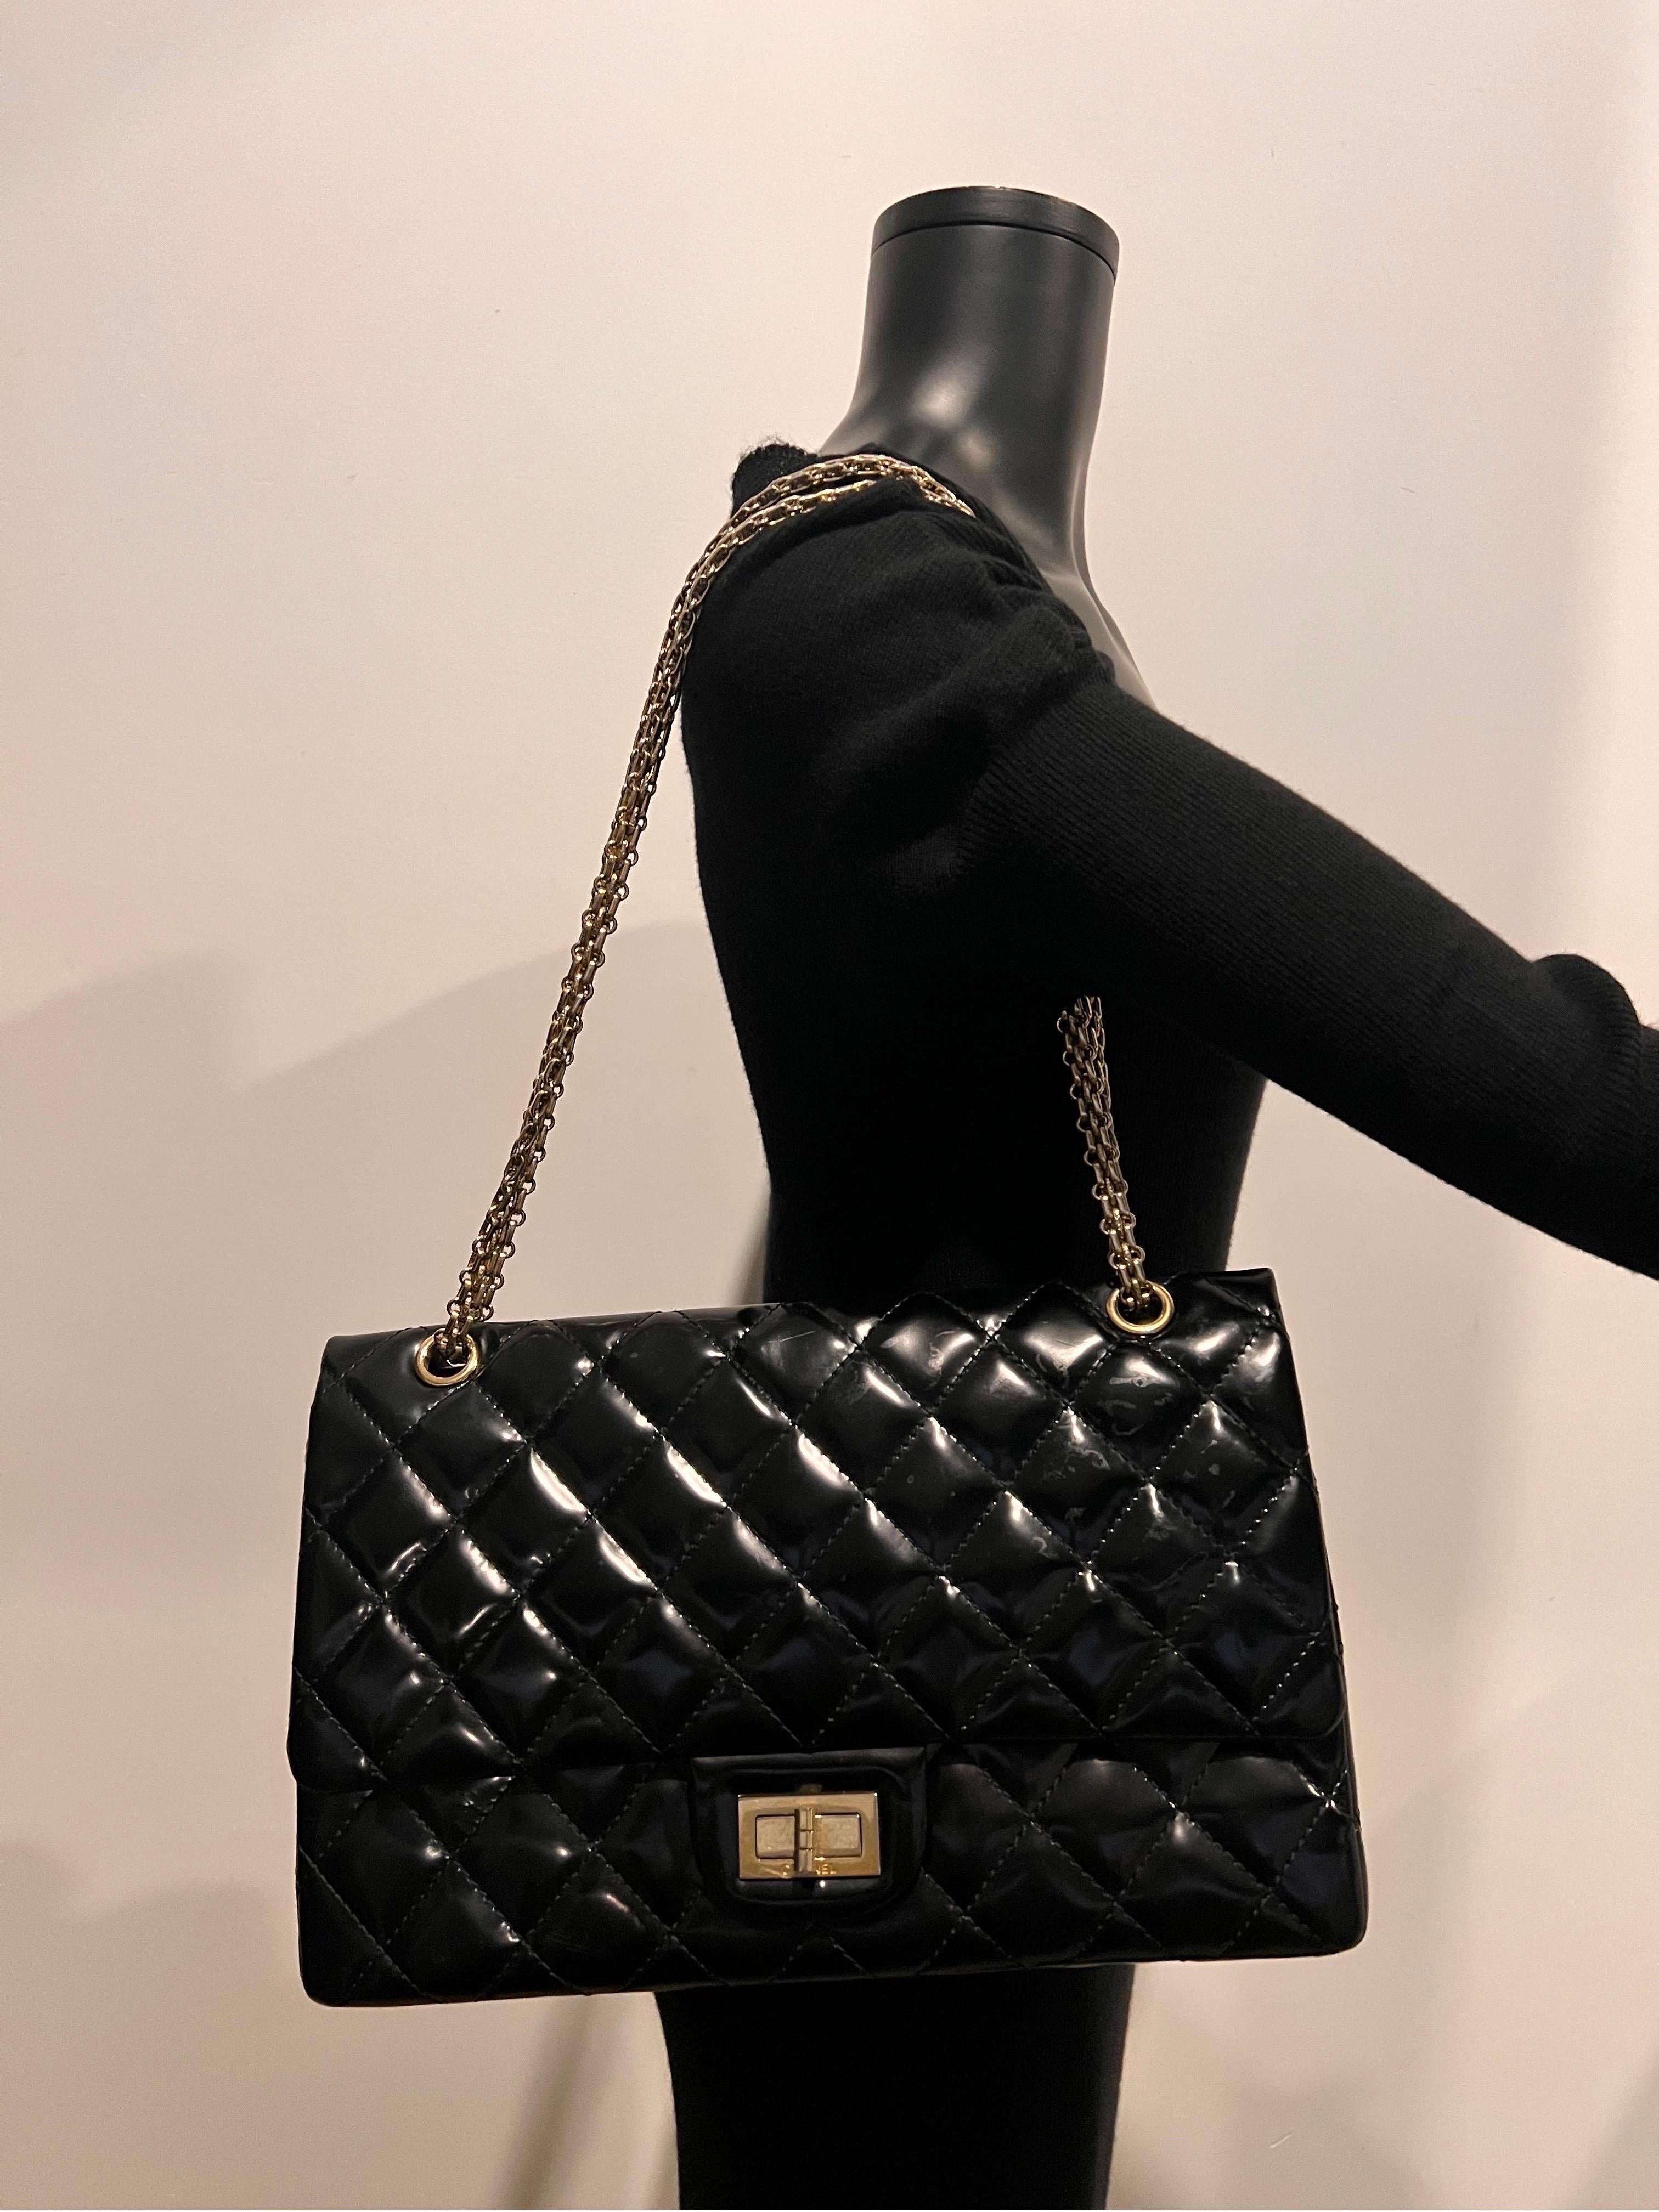 Chanel Jumbo quilted Flap bag in beautiful Patent leather. Excellent condition. 
Full set comes with dust bag, box, authenticity card. 

Bijoux chain is intricately etched and can be worn double or single strap. Interior features two